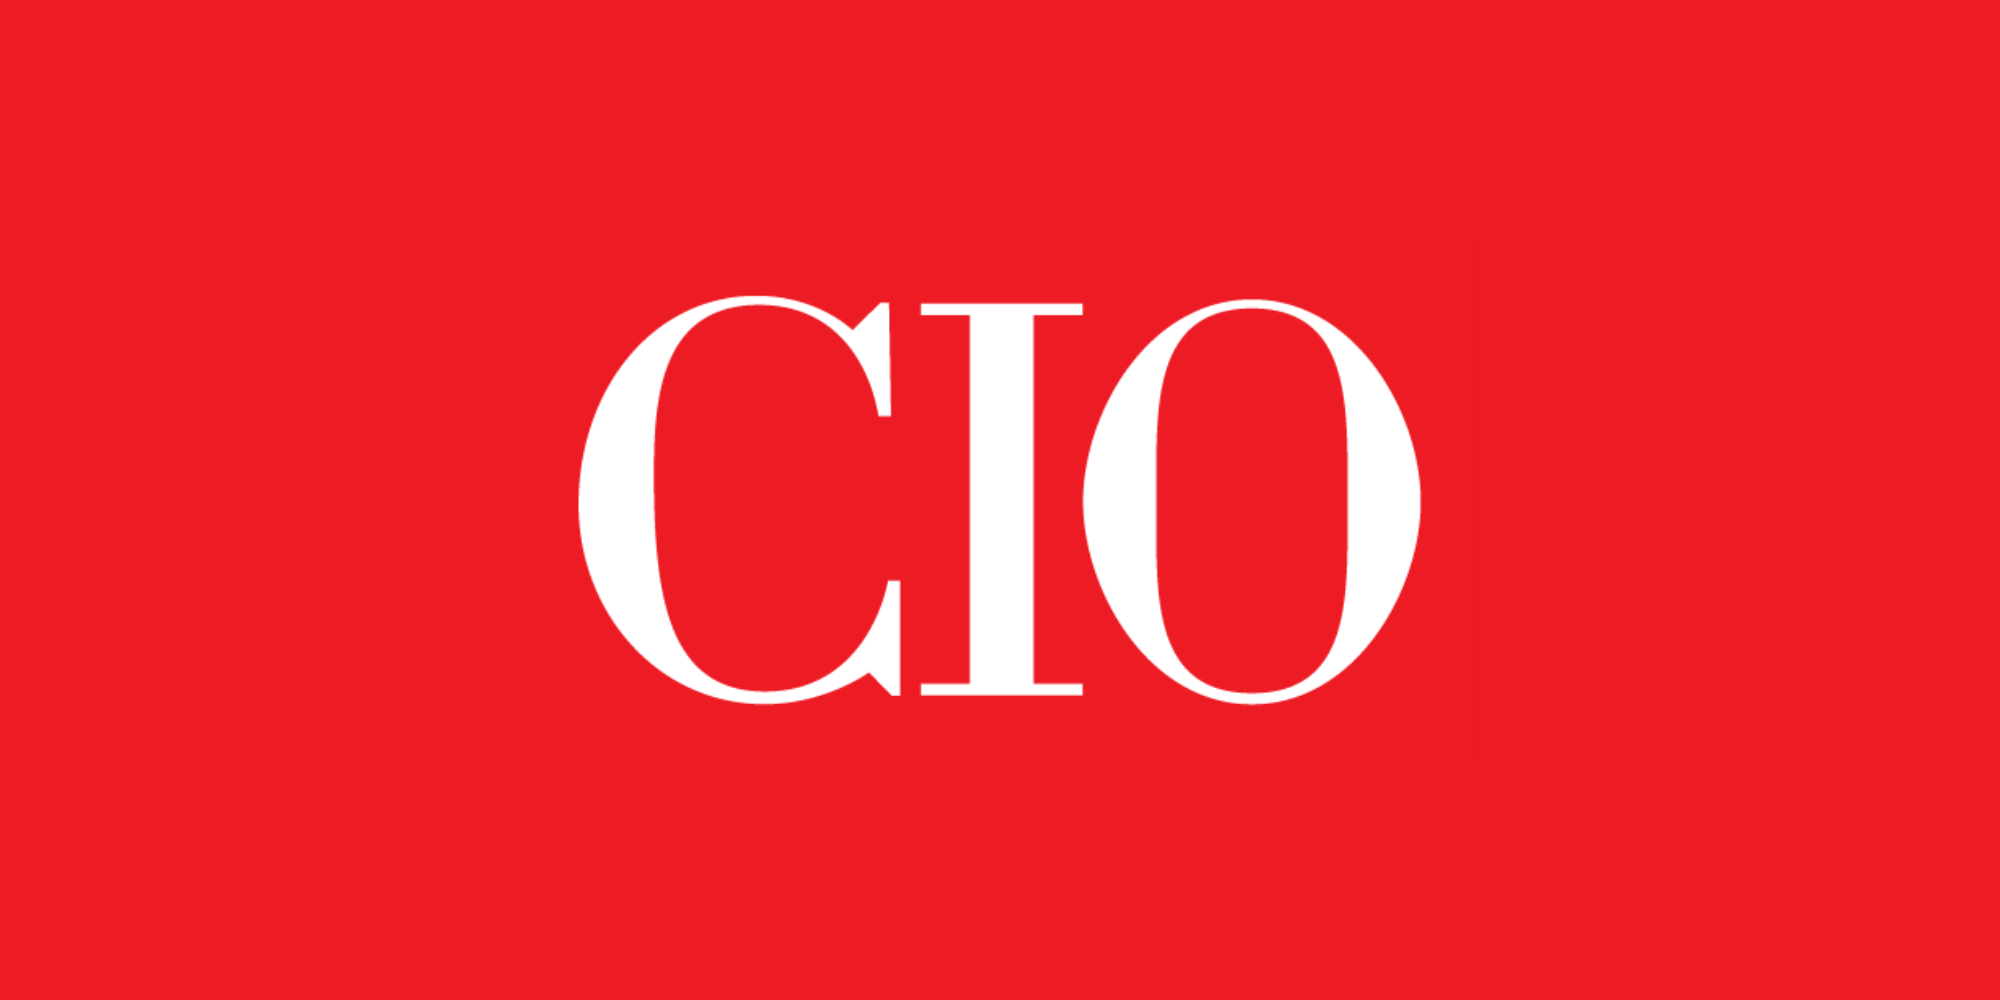 CIO Magazine: Creating net-new tech talent during the worst talent shortage we’ve seen